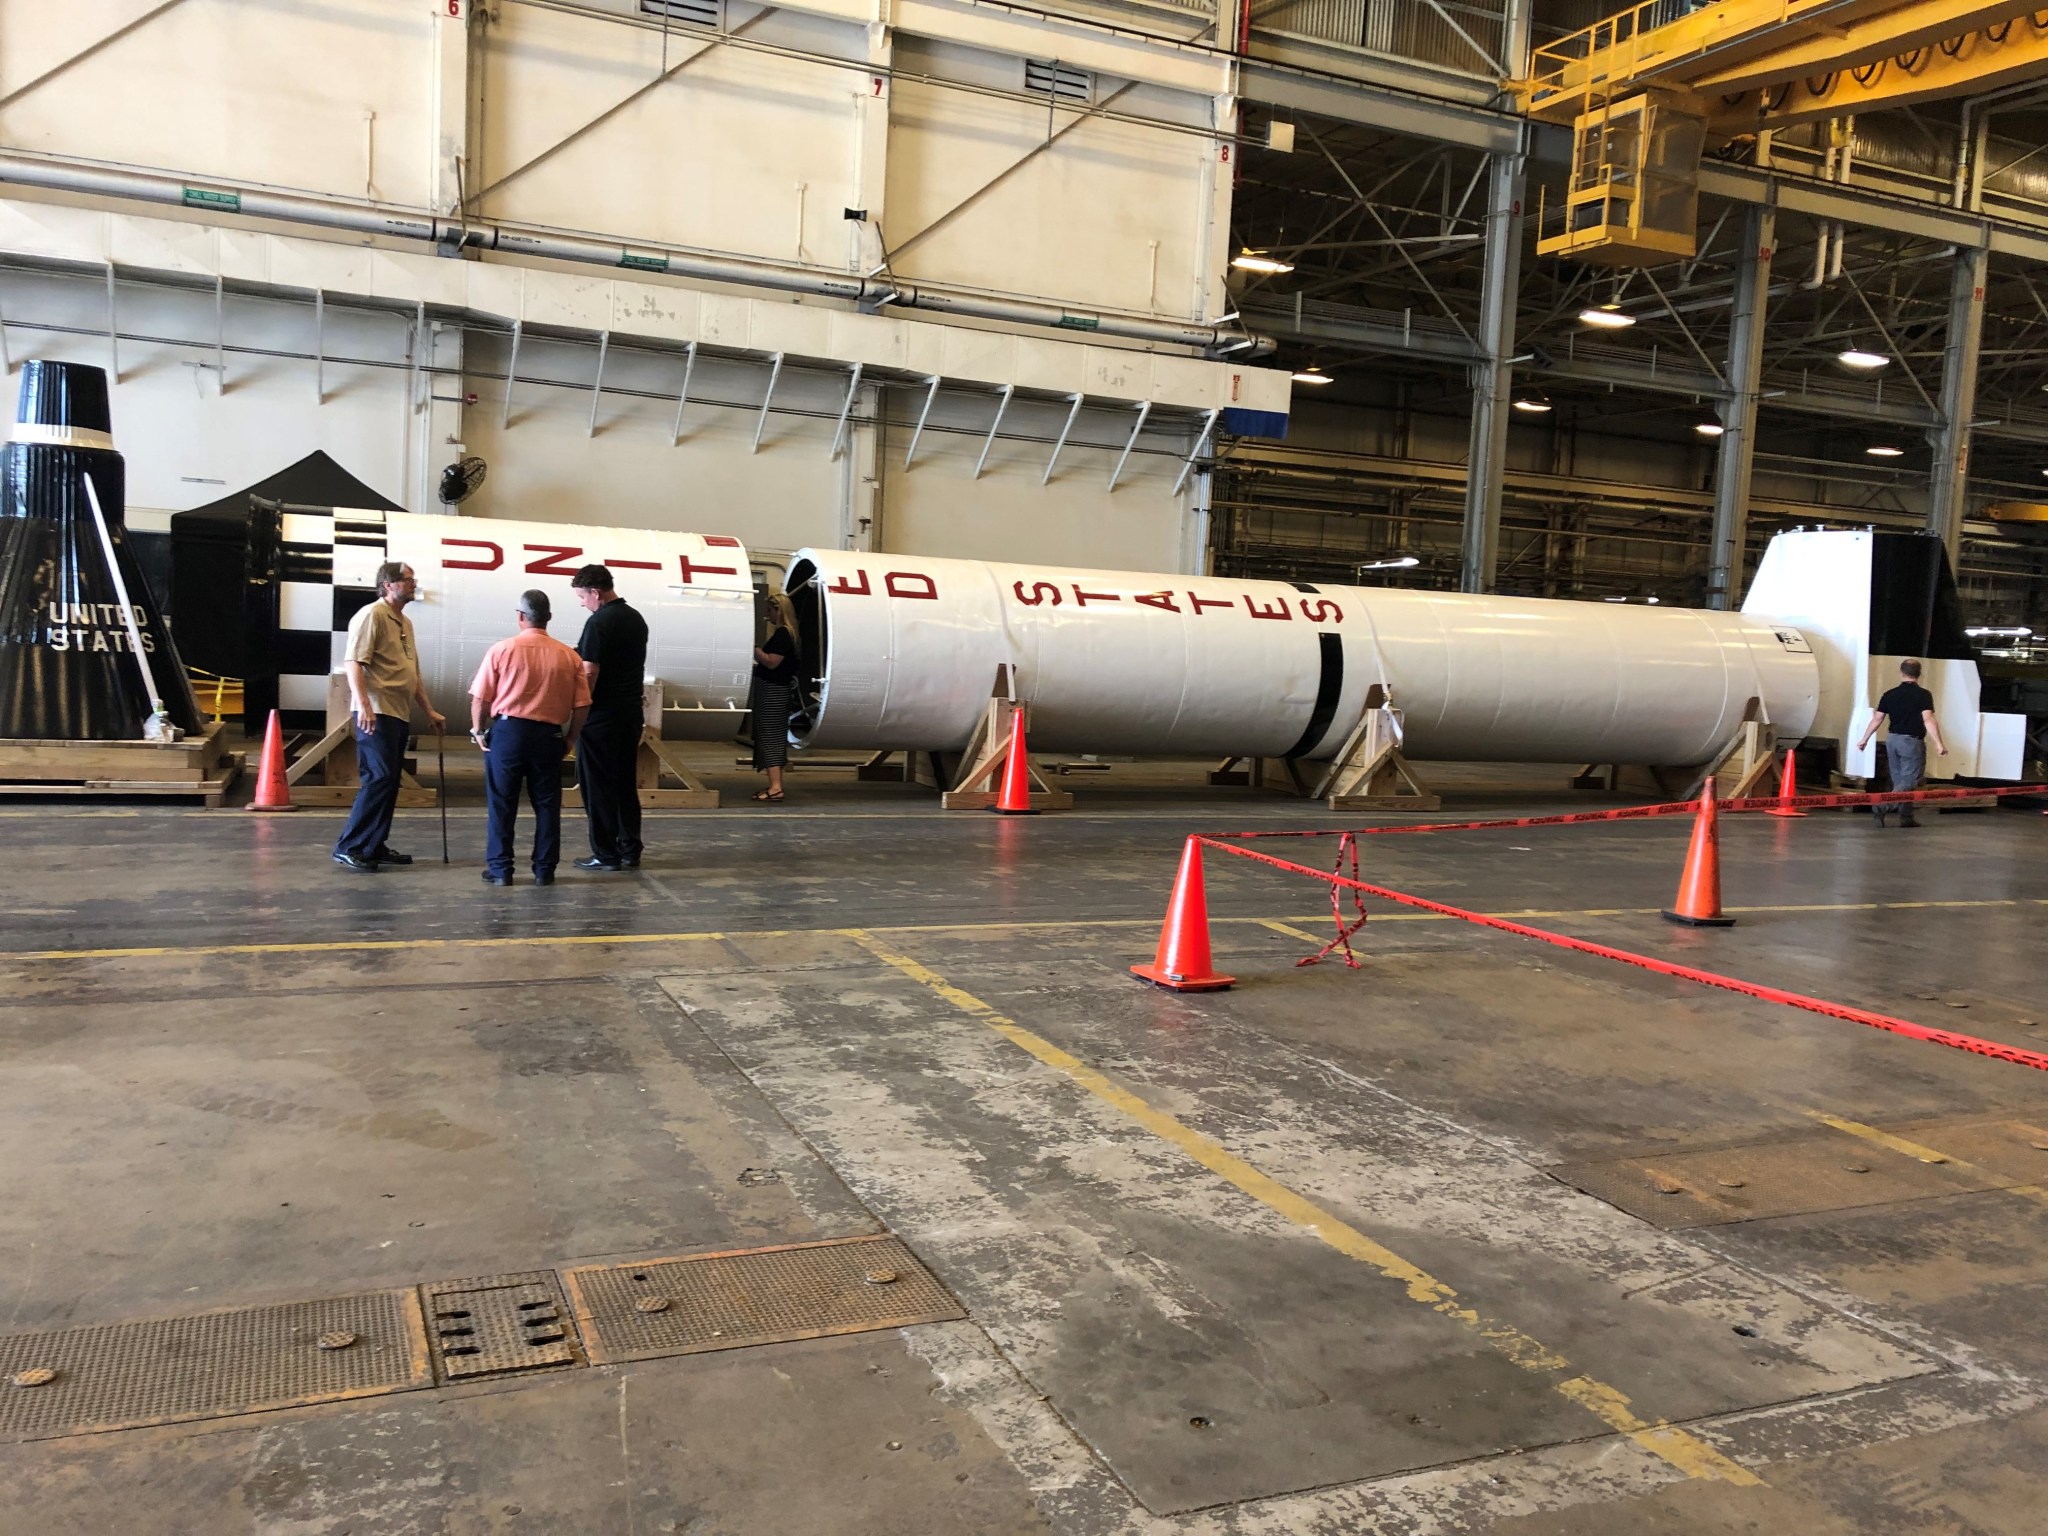 The U.S. Space & Rocket Center recently partnered with Aerie Aerospace to restore one of the first Mercury-Redstone rockets. 